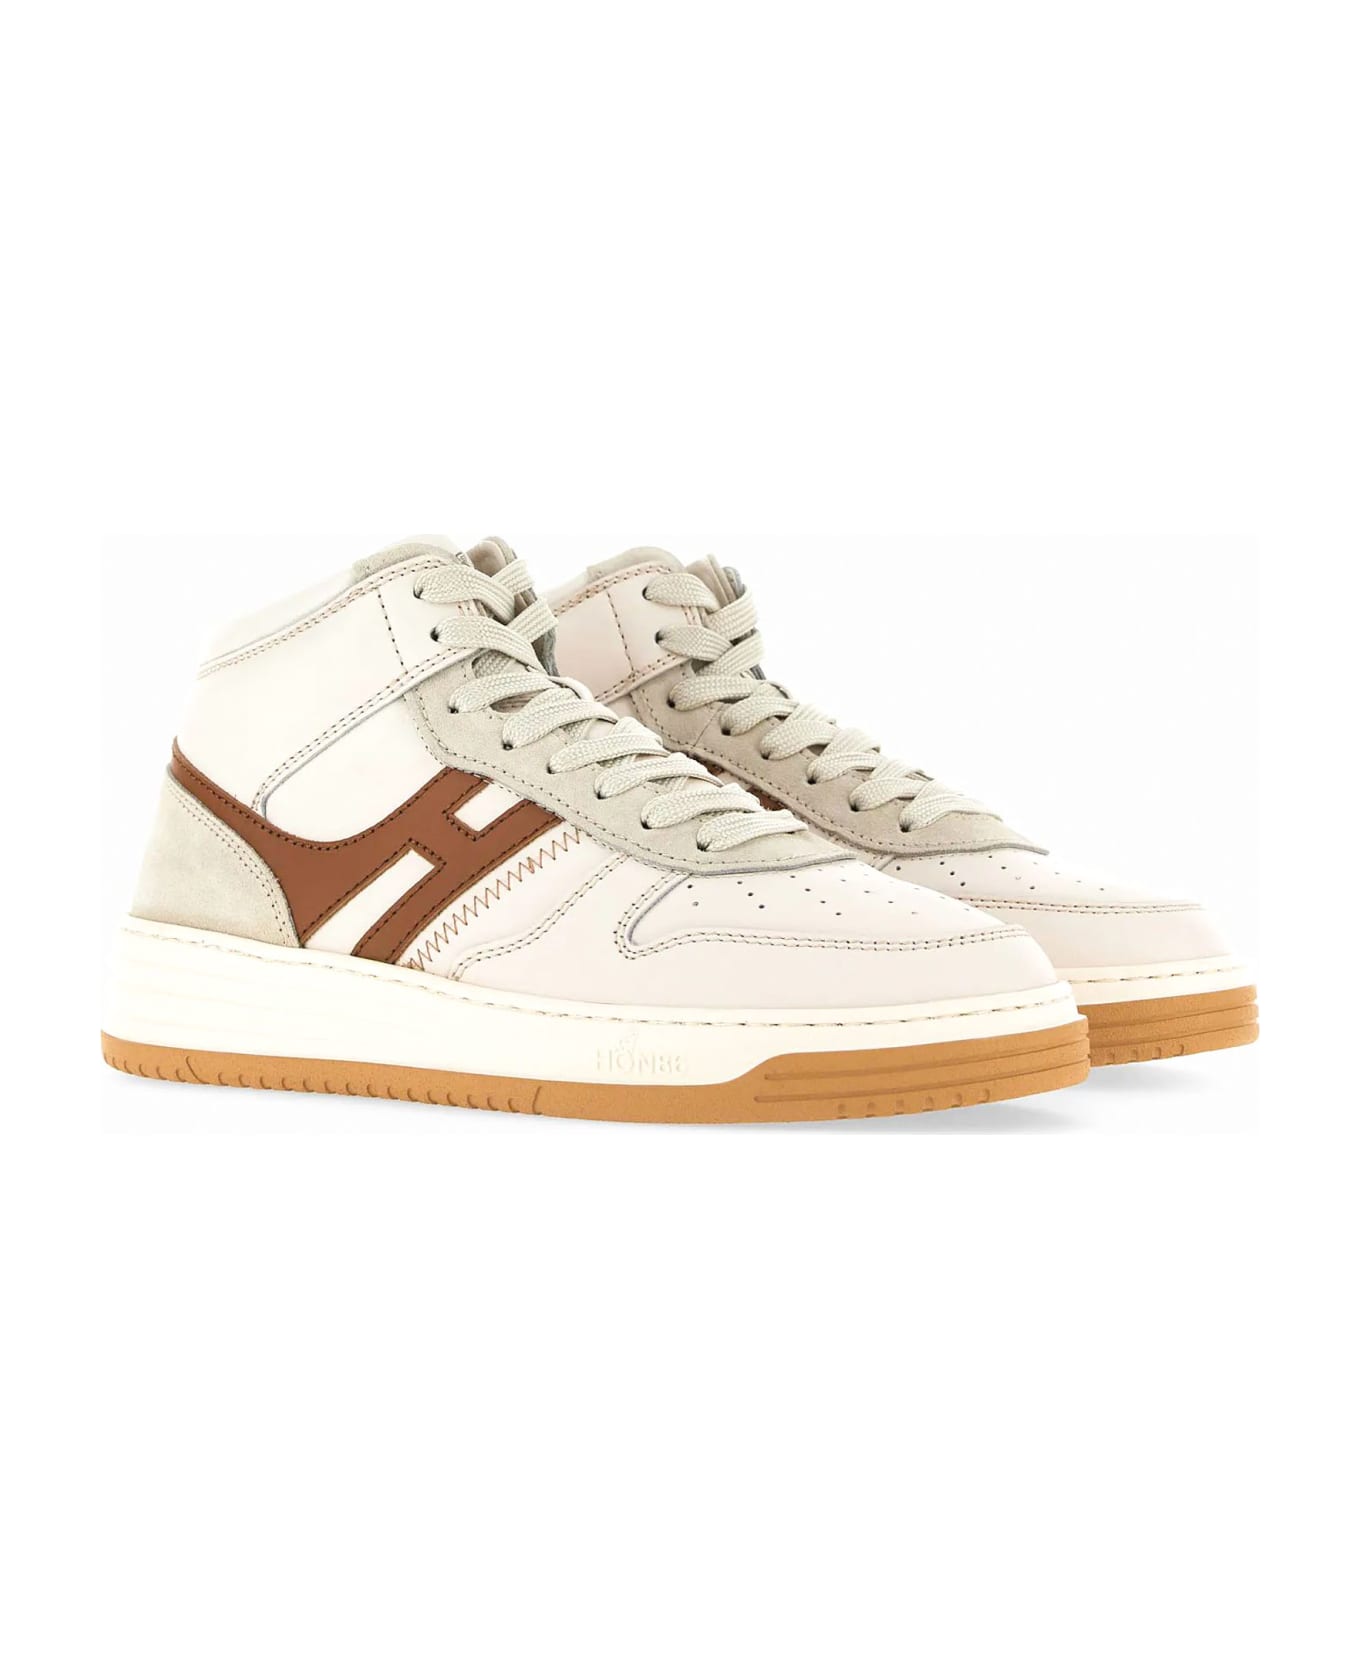 Hogan H630 Leather High-top Sneakers - White